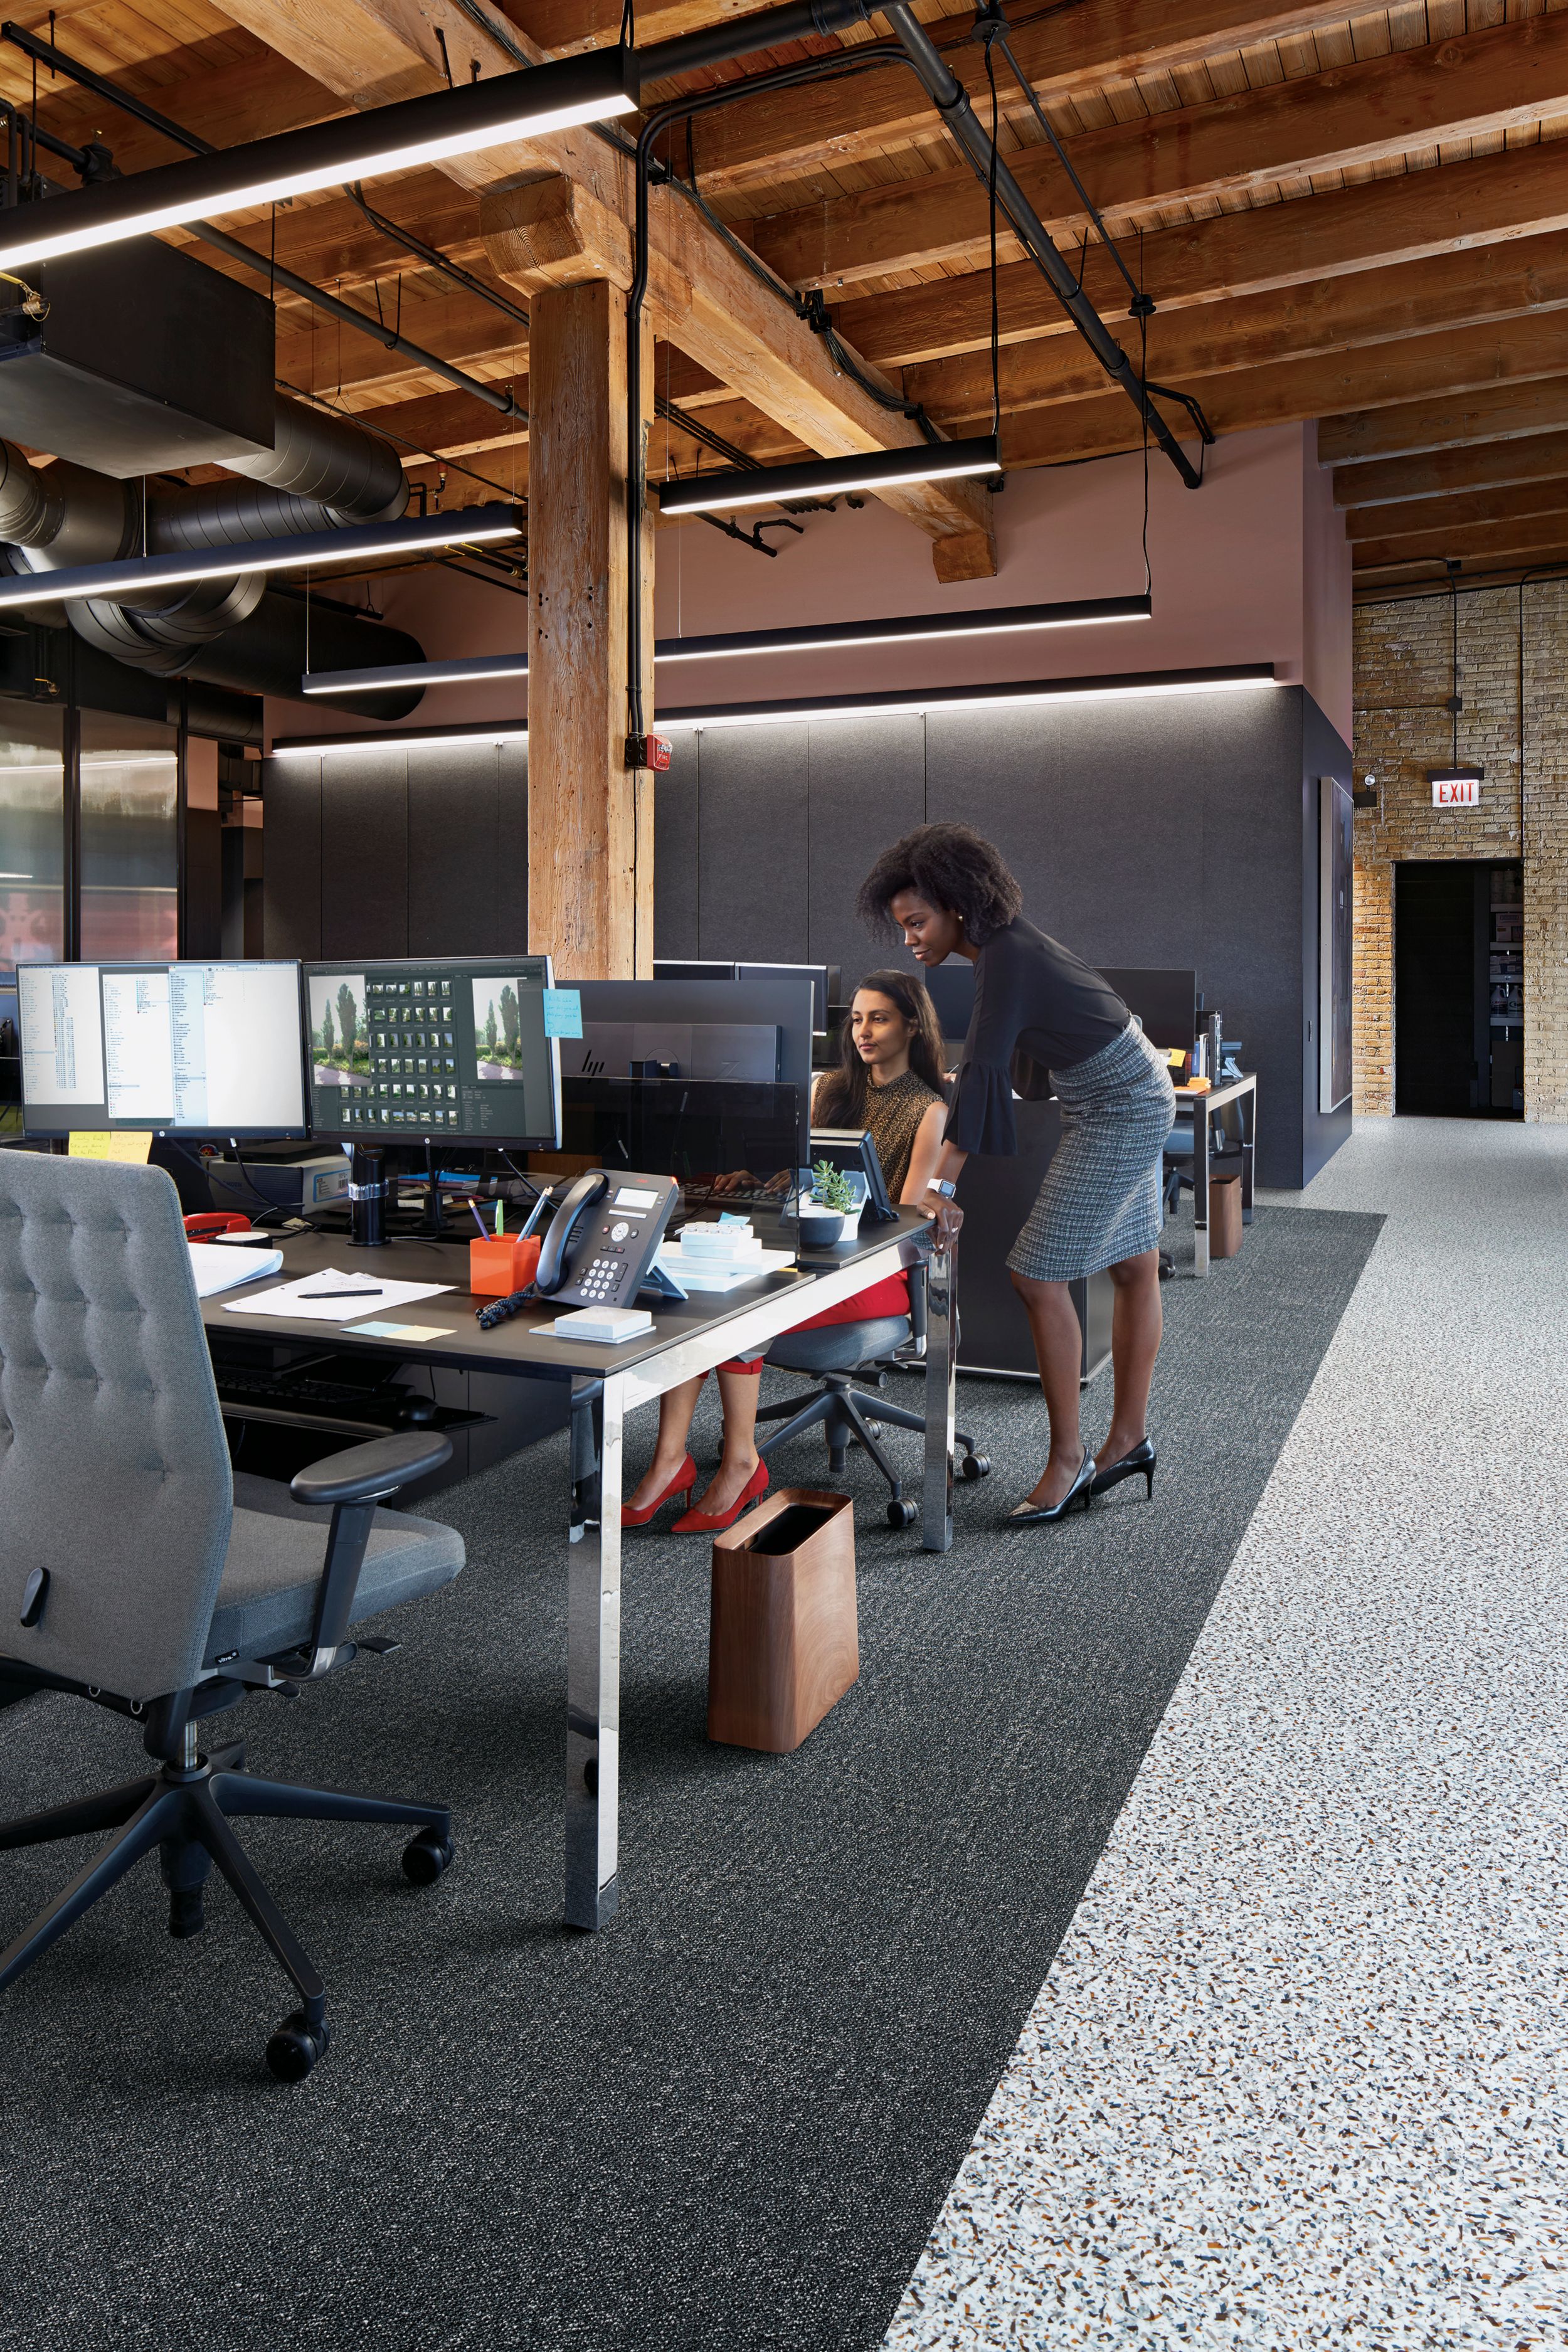 Interface Step it Up and Walk on By carpet tile in common work space with two people numéro d’image 8